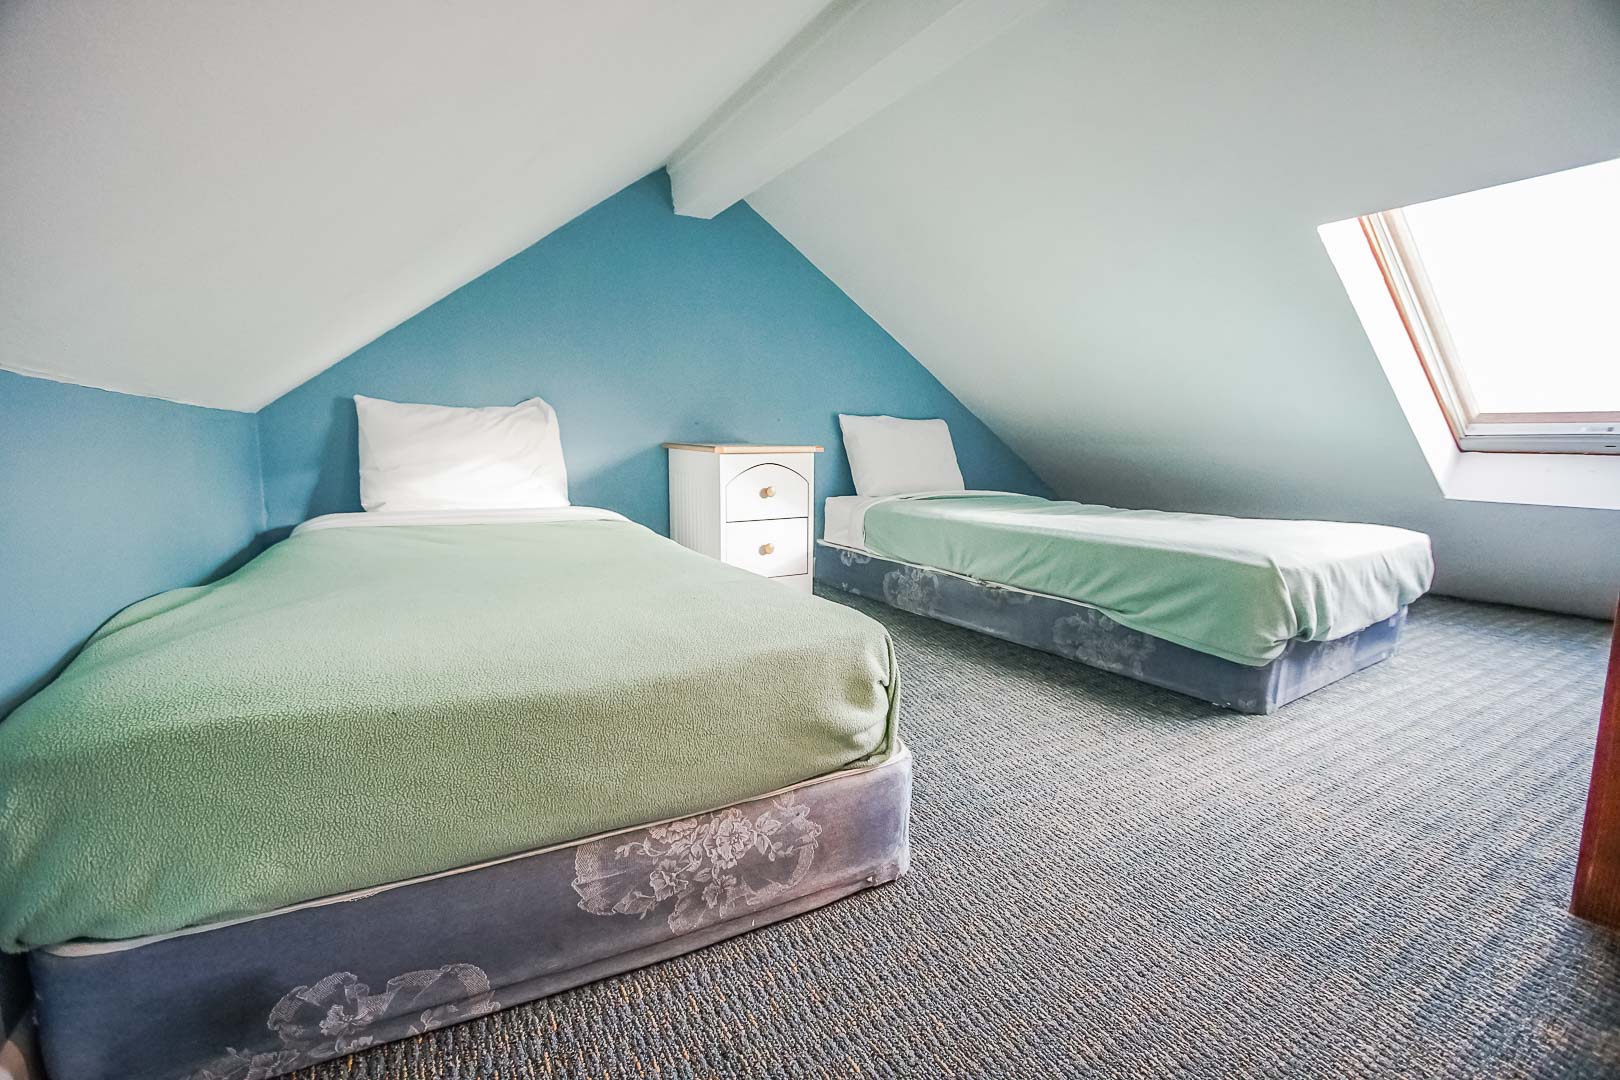 A loft bedroom with double beds at VRI's Seawinds II Resort in Massachusetts.